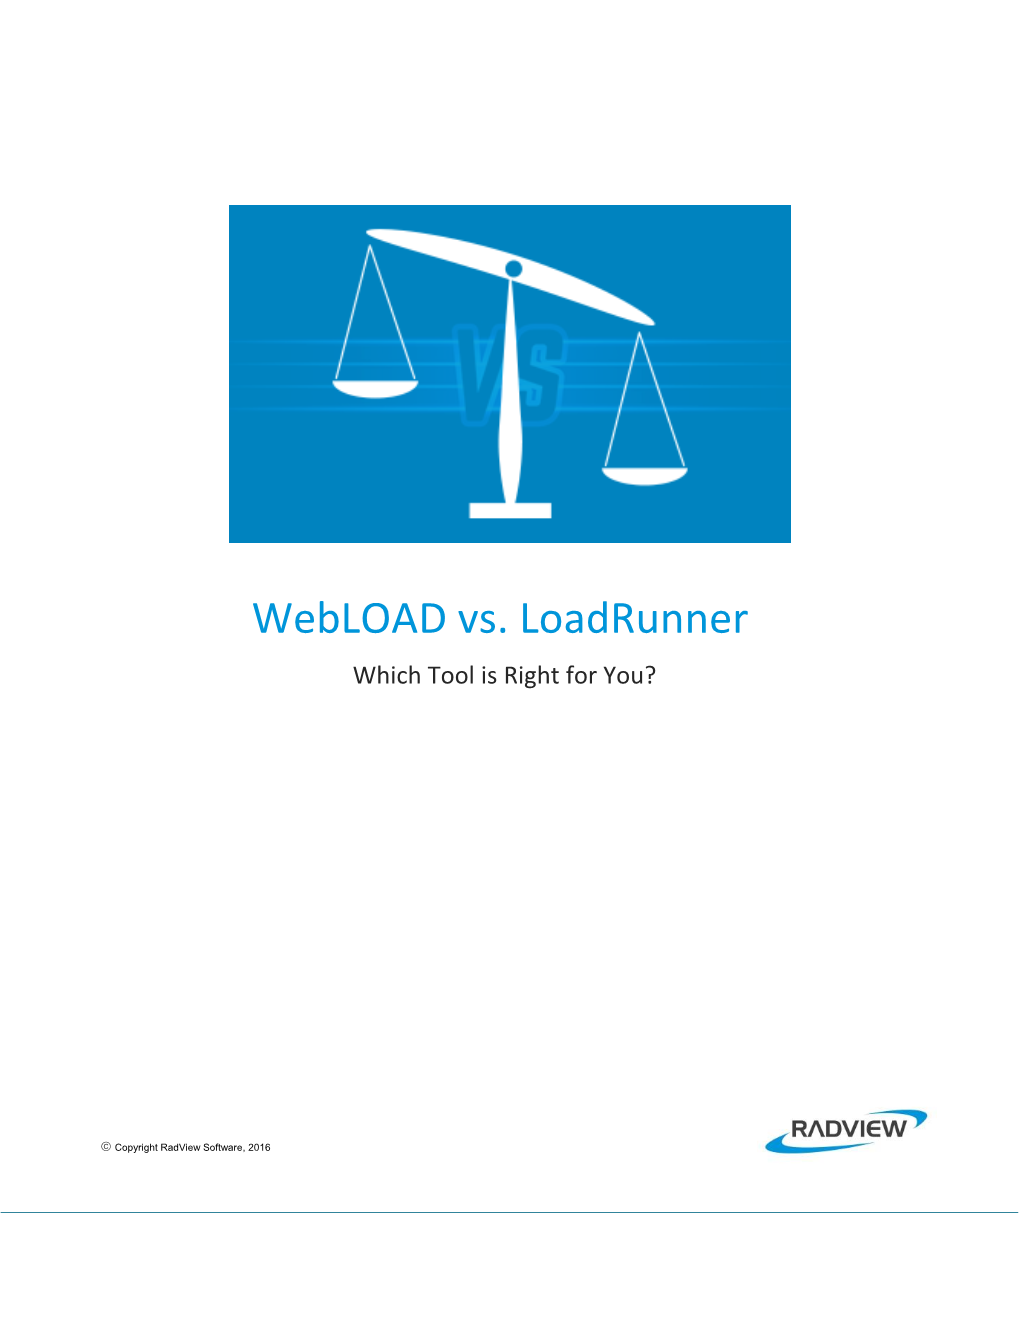 Webload Vs. Loadrunner Which Tool Is Right for You?